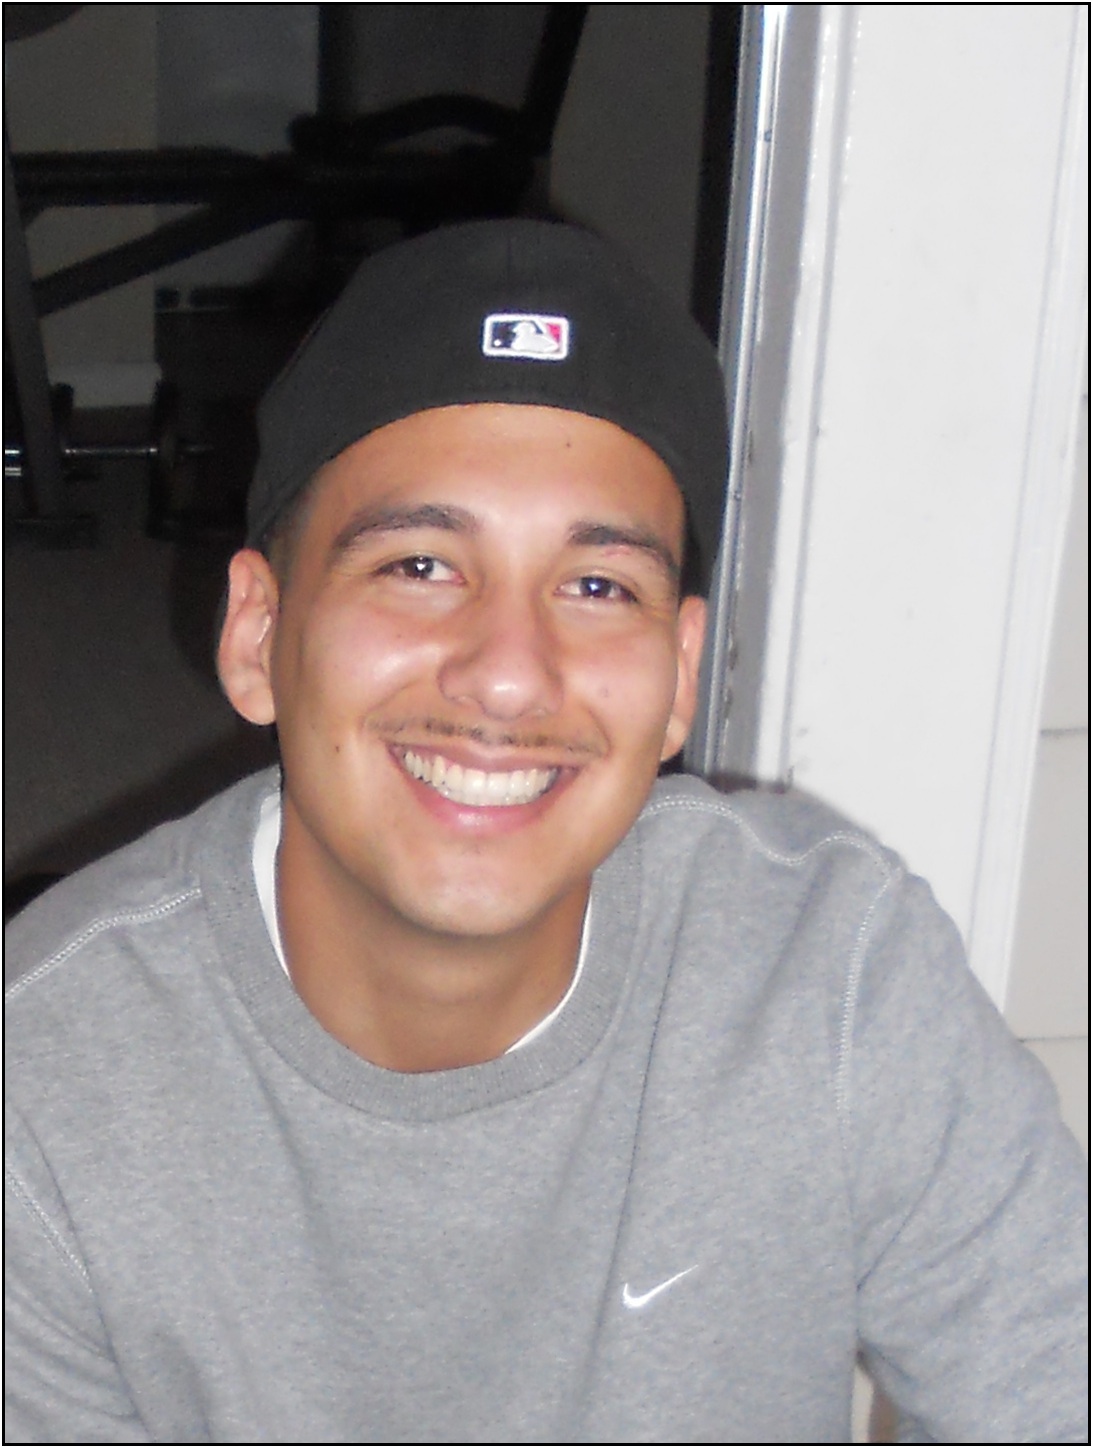 Daneil Guzman is standing in front of a doorframe, smiling to the camera wearing a baseball cap and sweatshirt